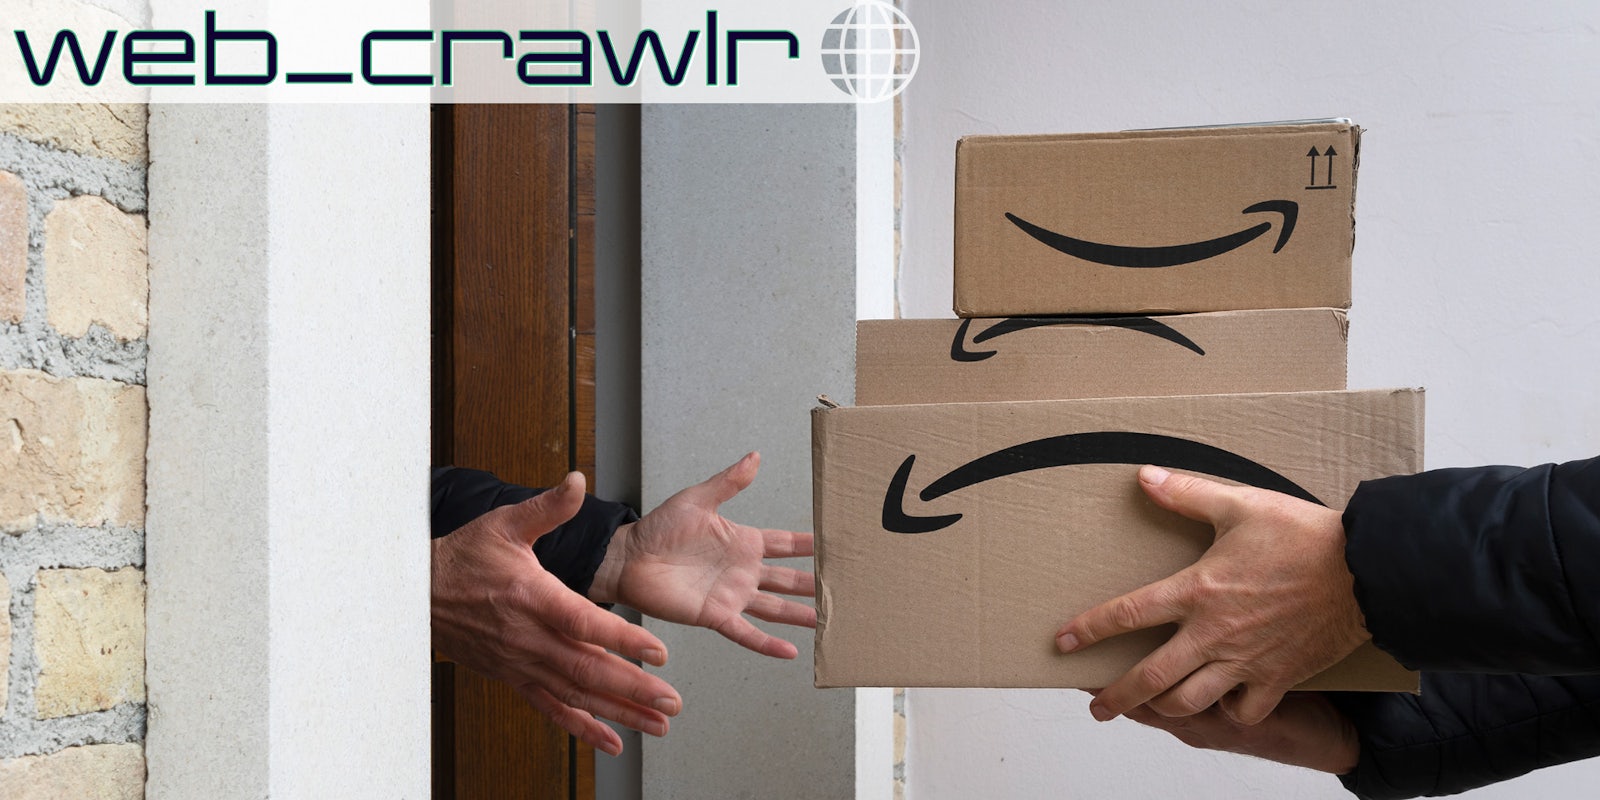 A person handing Amazon packages to a customer. The Daily Dot newsletter web_crawlr logo is in the top left corner.